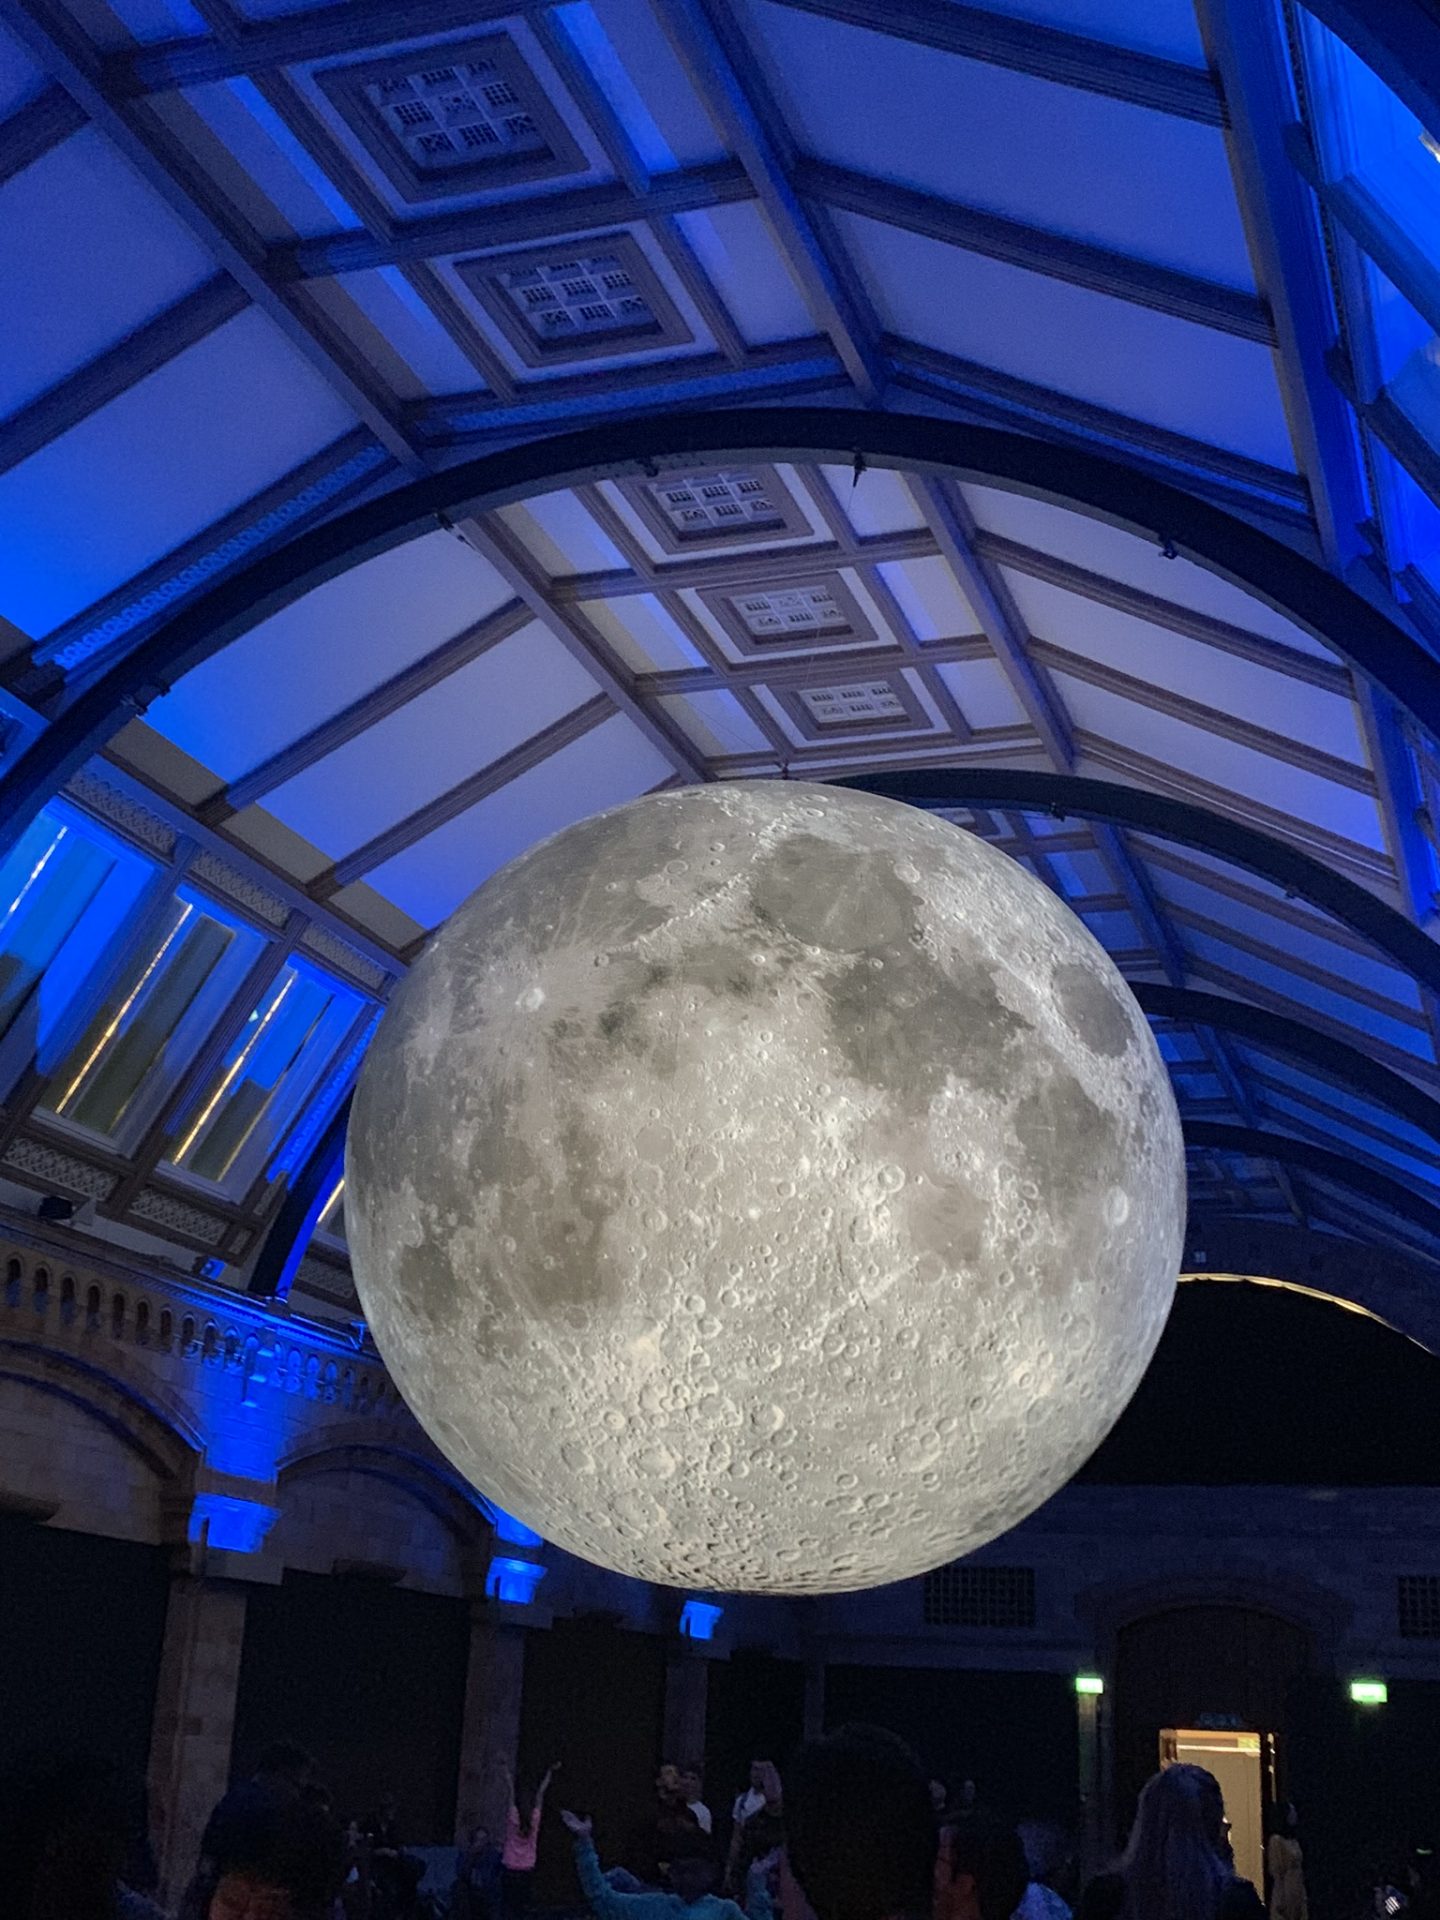 London bucket list: learning about the moon at the Natural History Museum